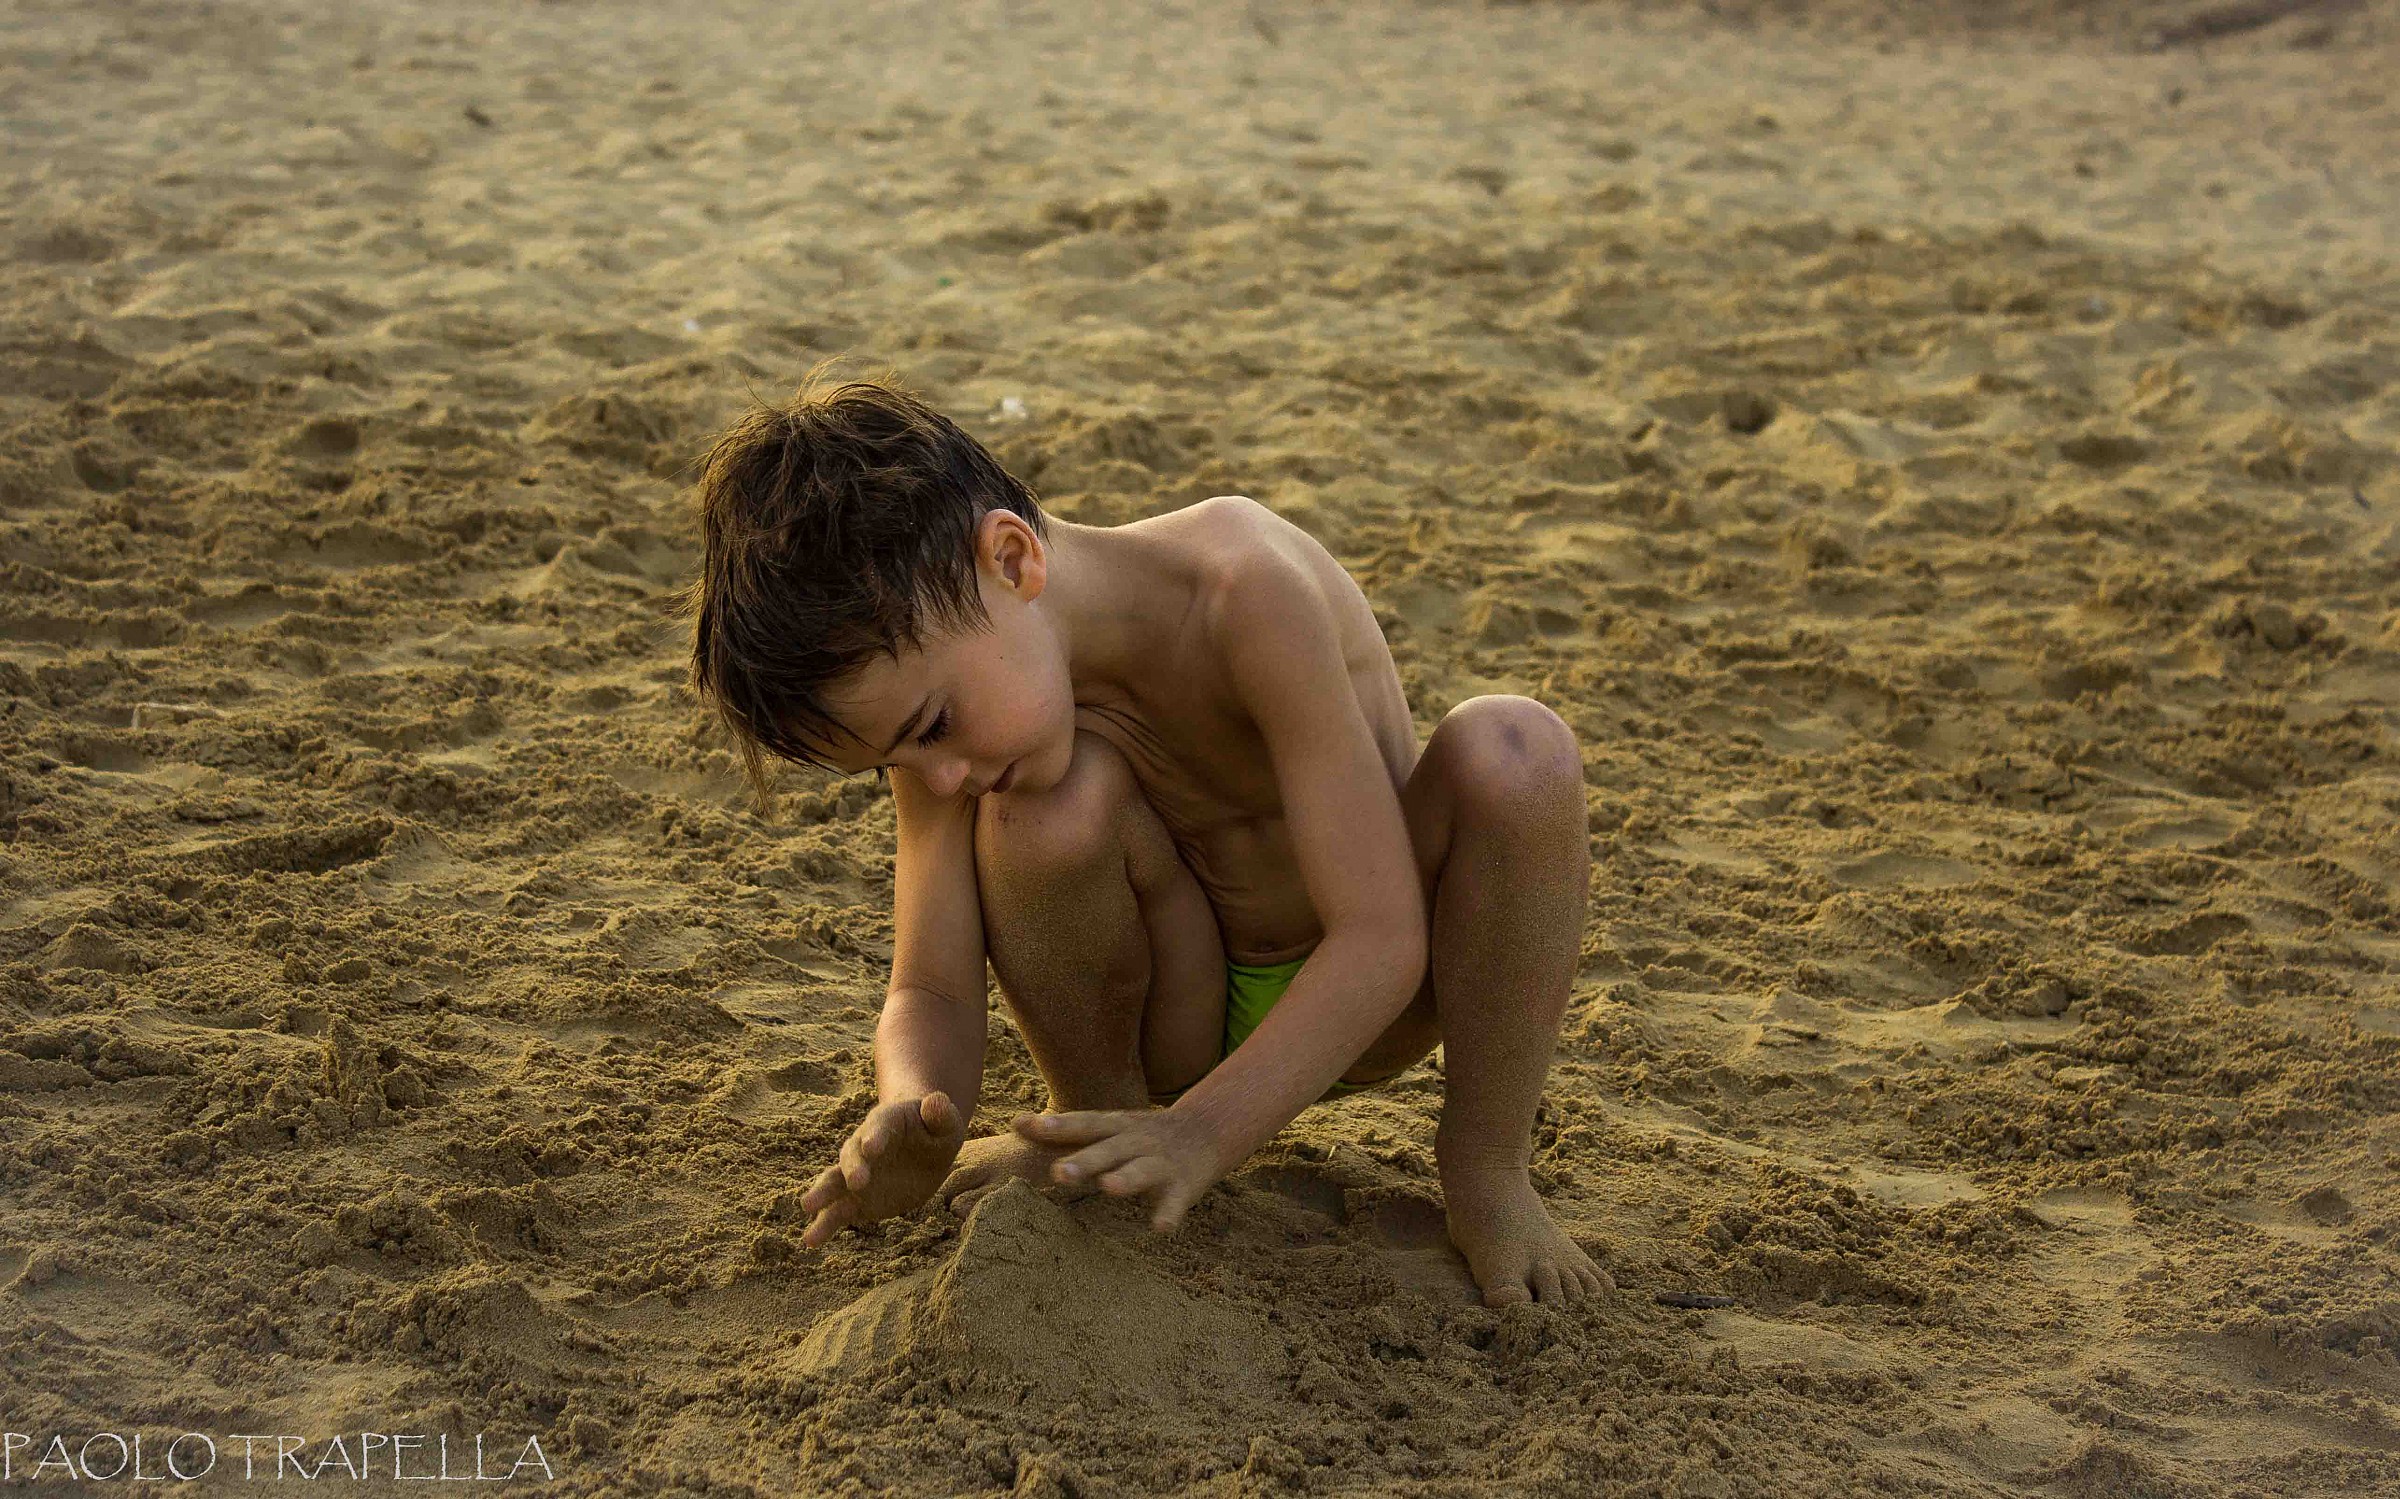 play in the sand...